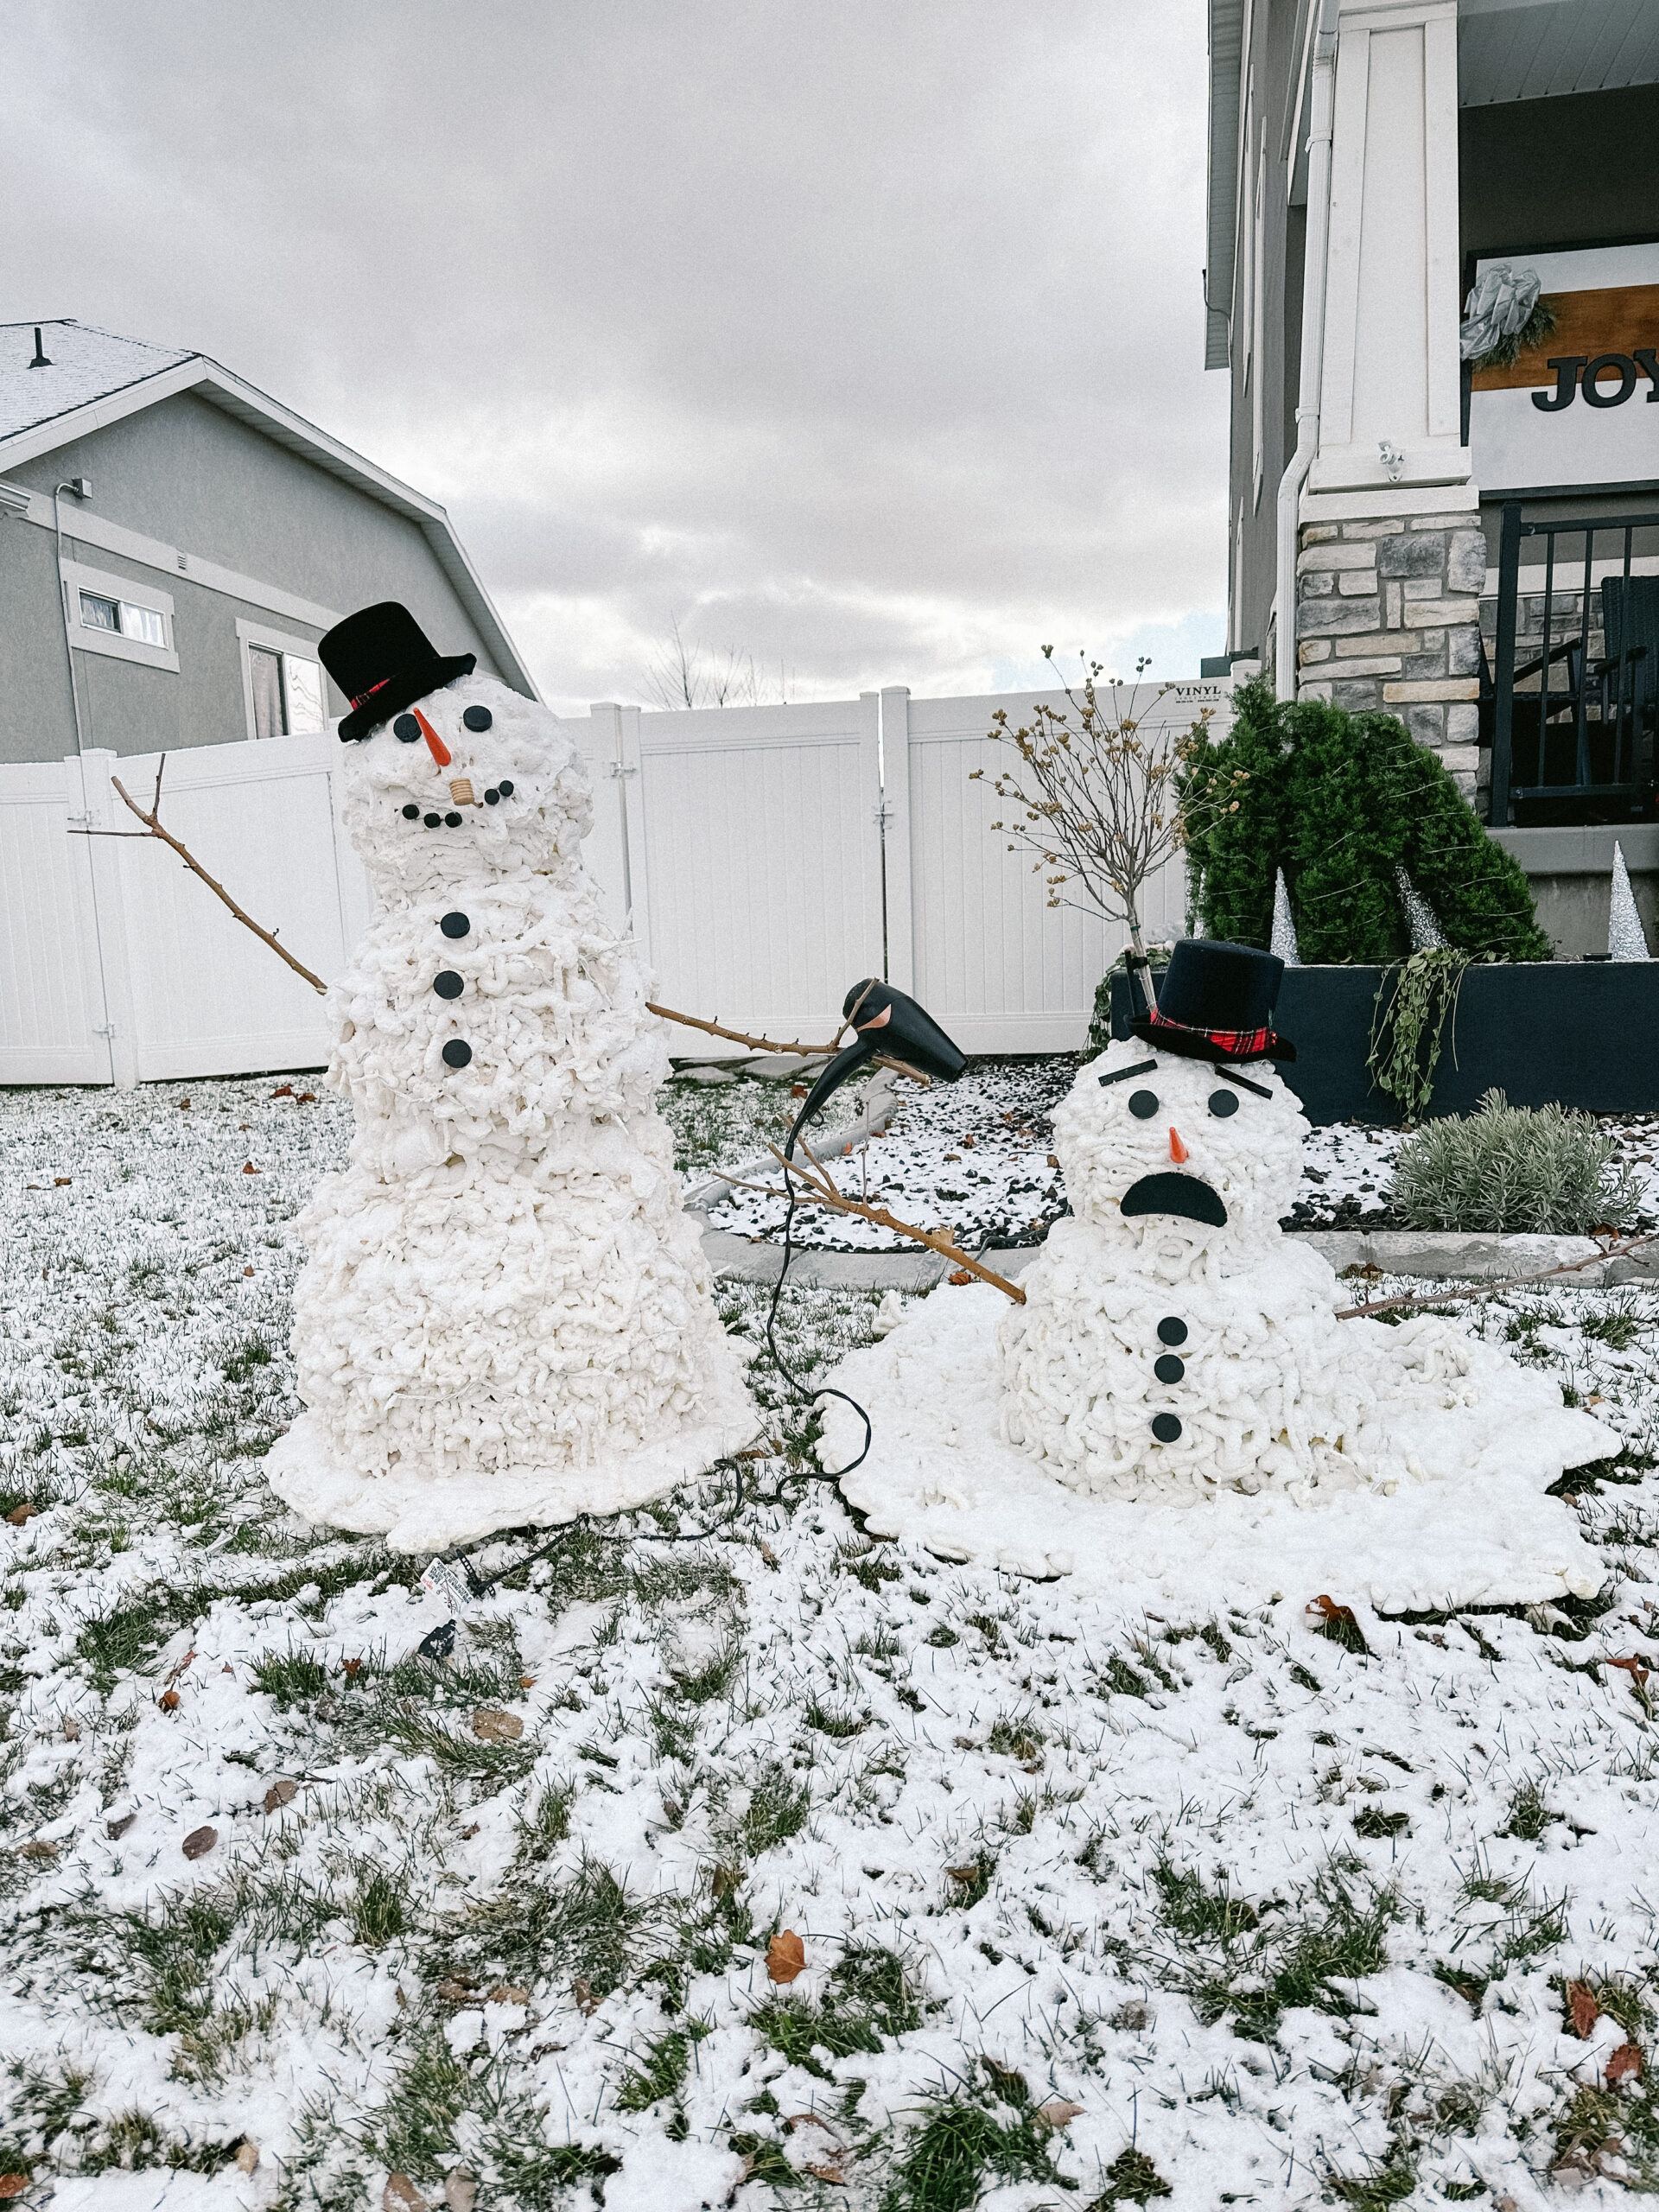 How to Build a Snowman - Snowman Making Tips